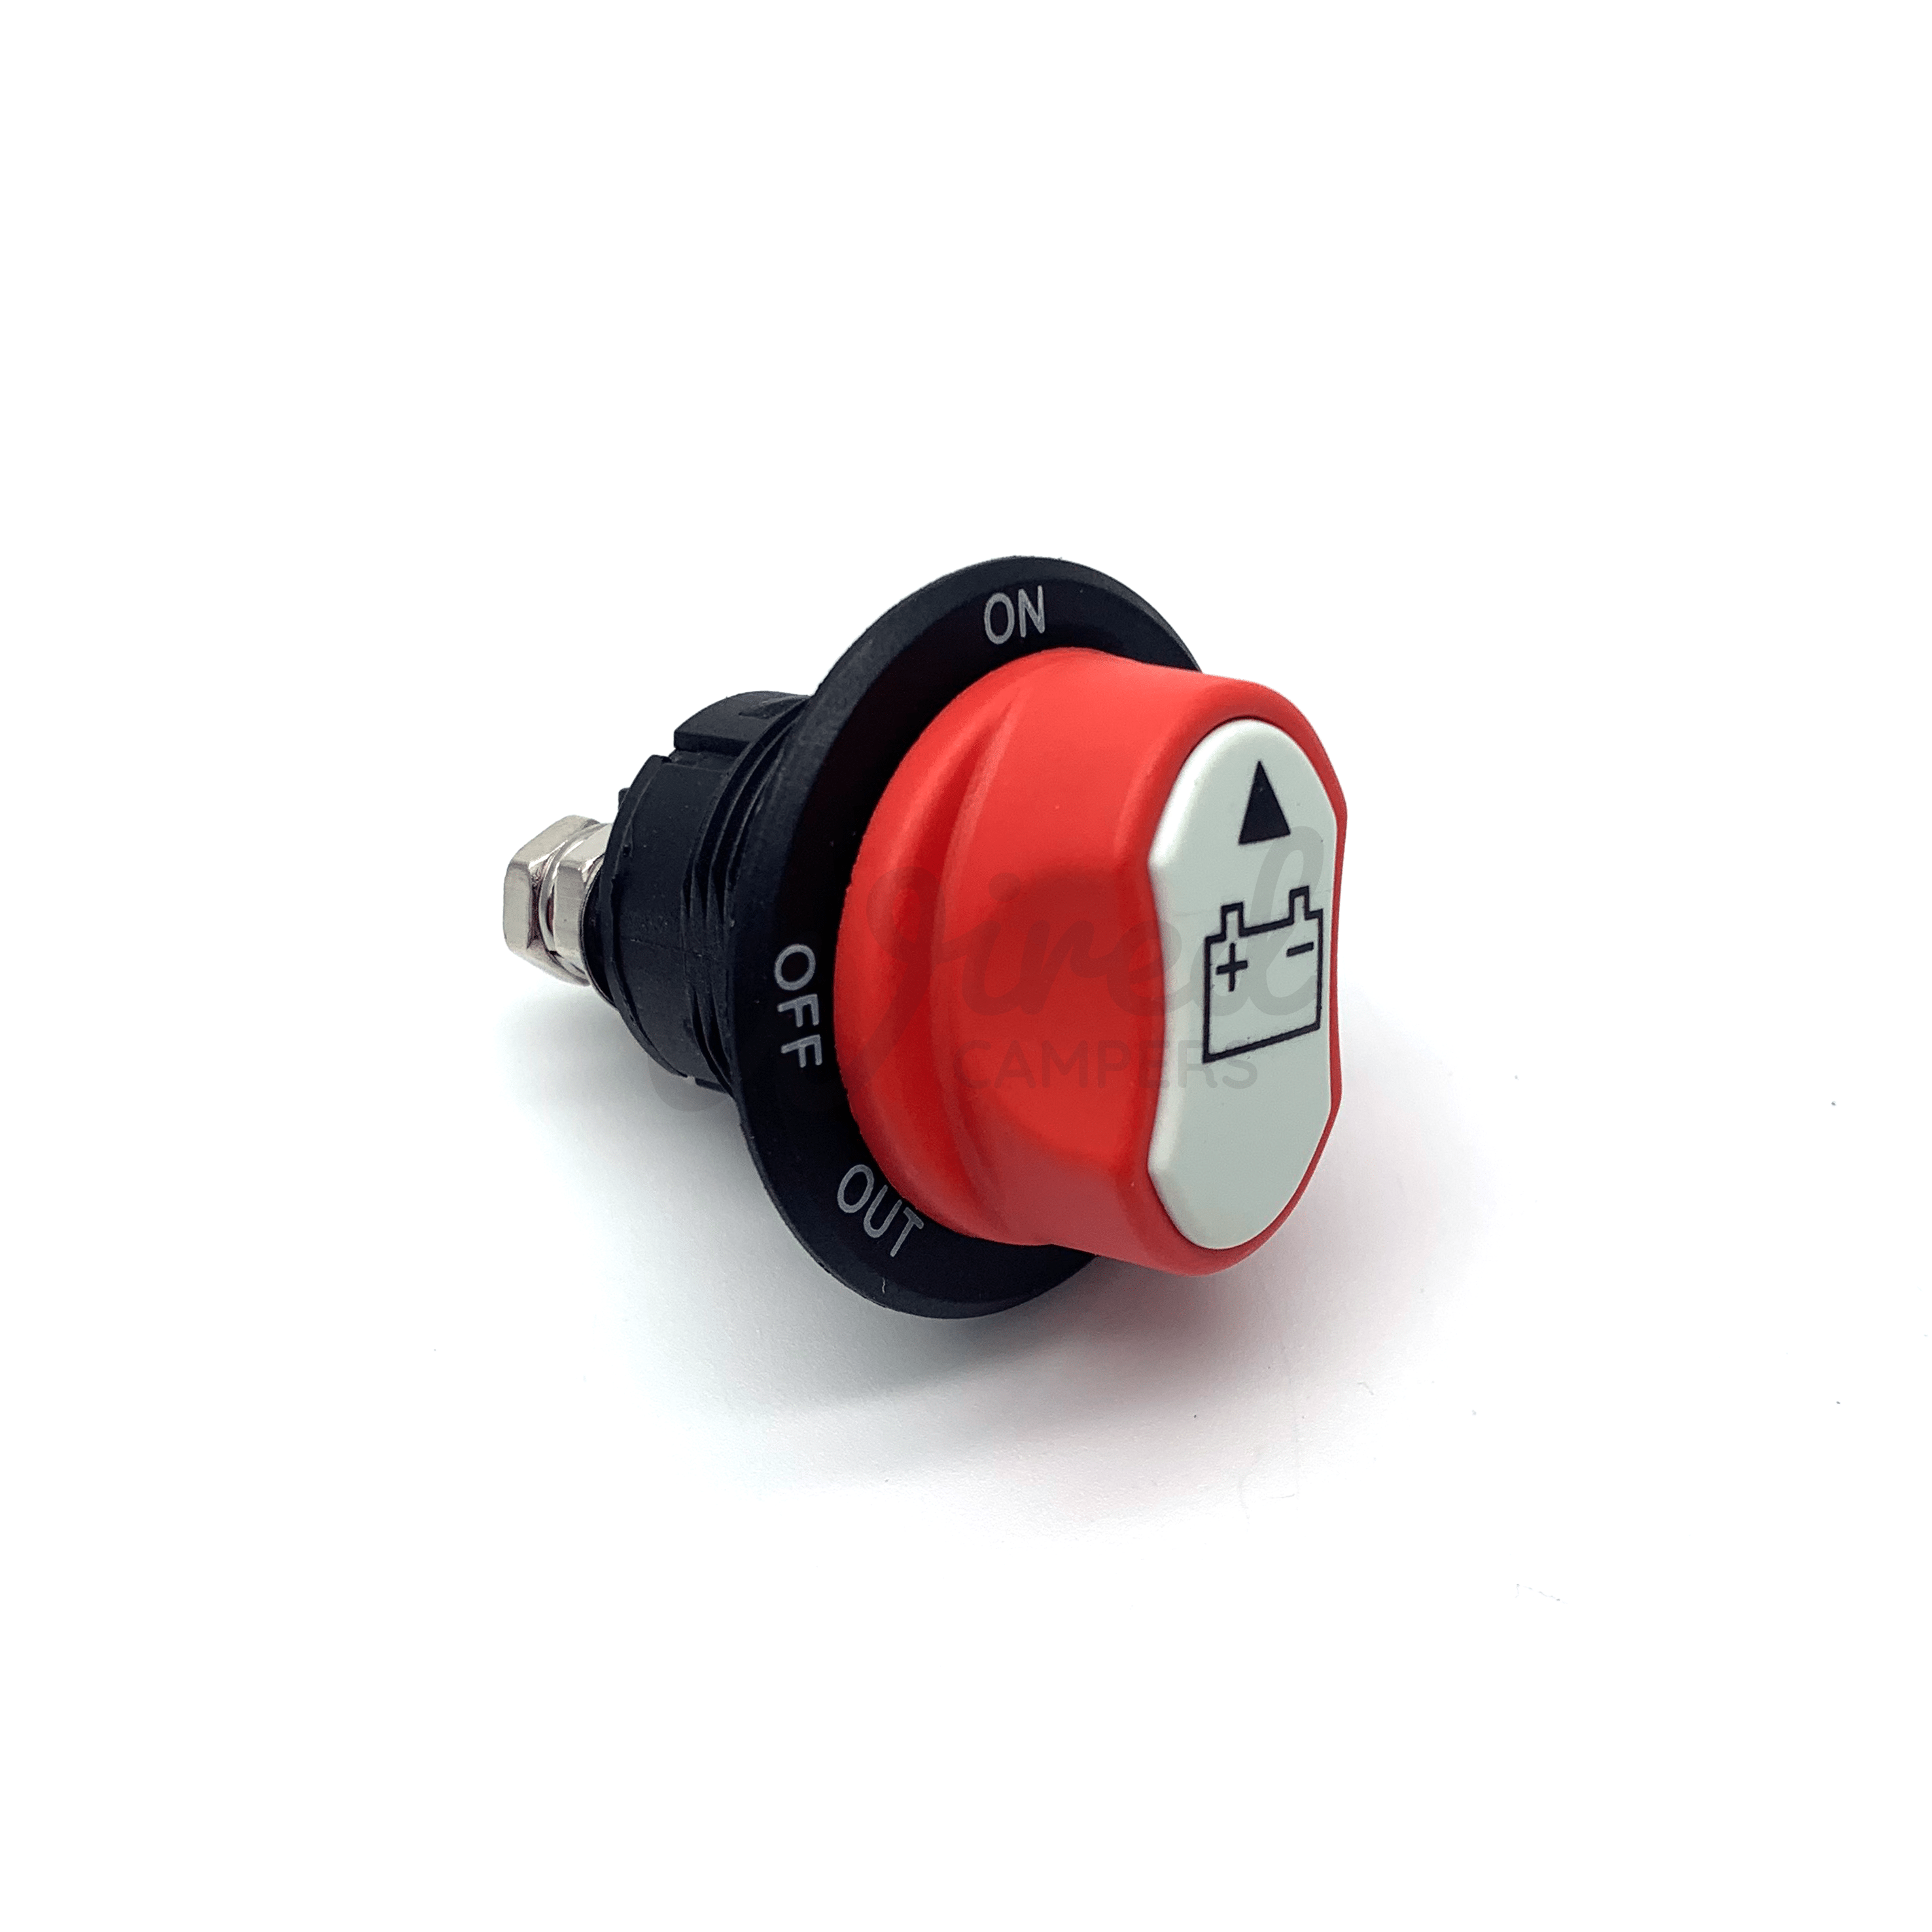 Wired Campers Limited Mini Panel Mount Removable Key 12V-32V 100A Battery Power Isolator Kill Switch